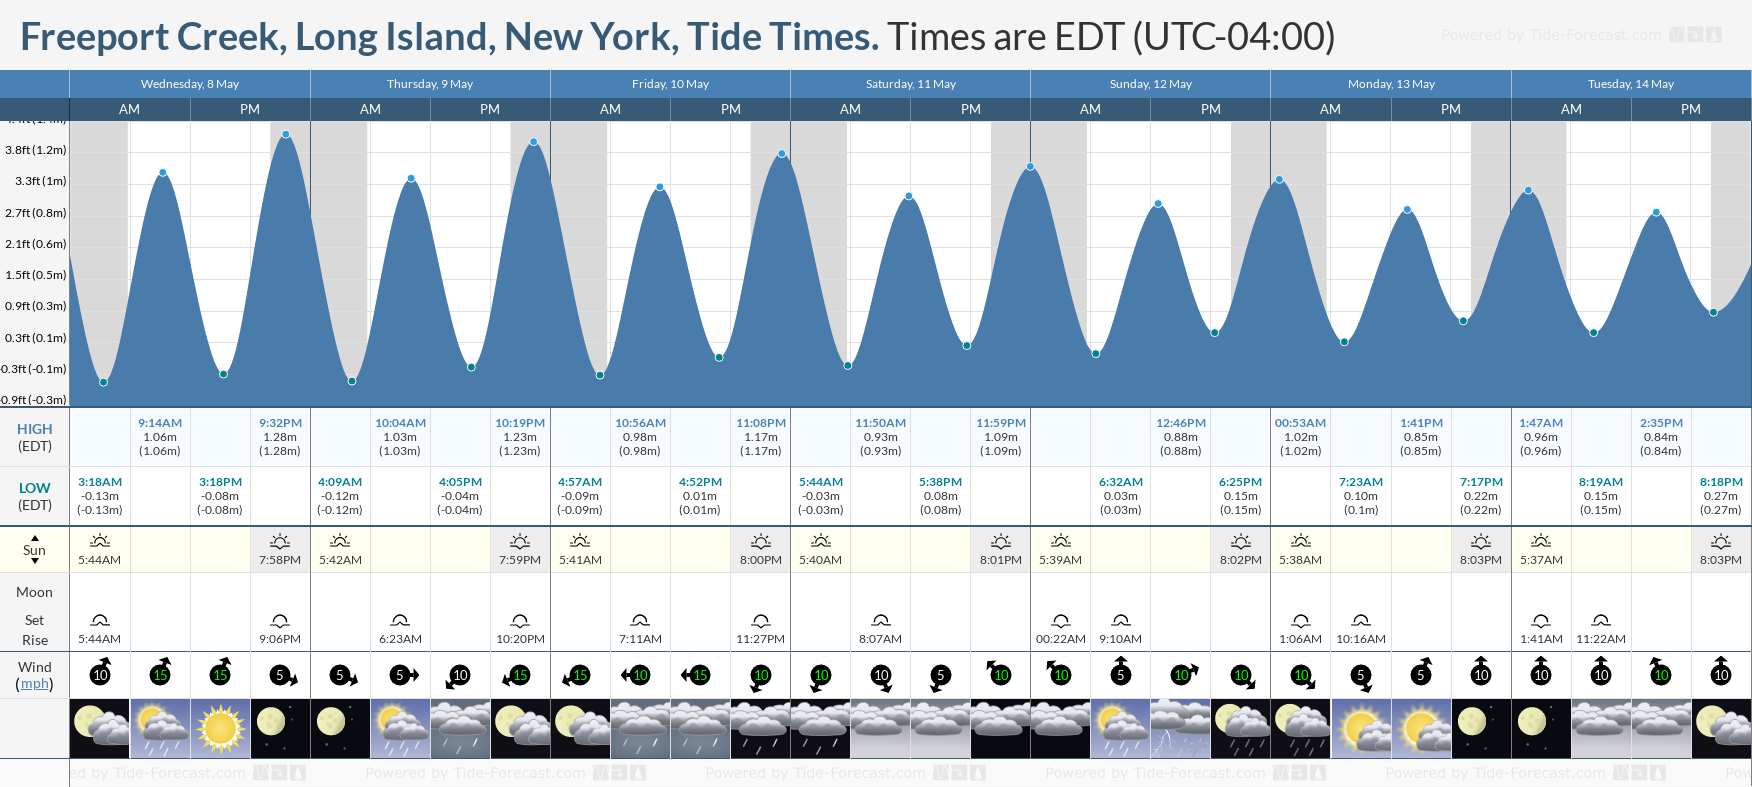 Freeport Creek, Long Island, New York Tide Chart including high and low tide tide times for the next 7 days